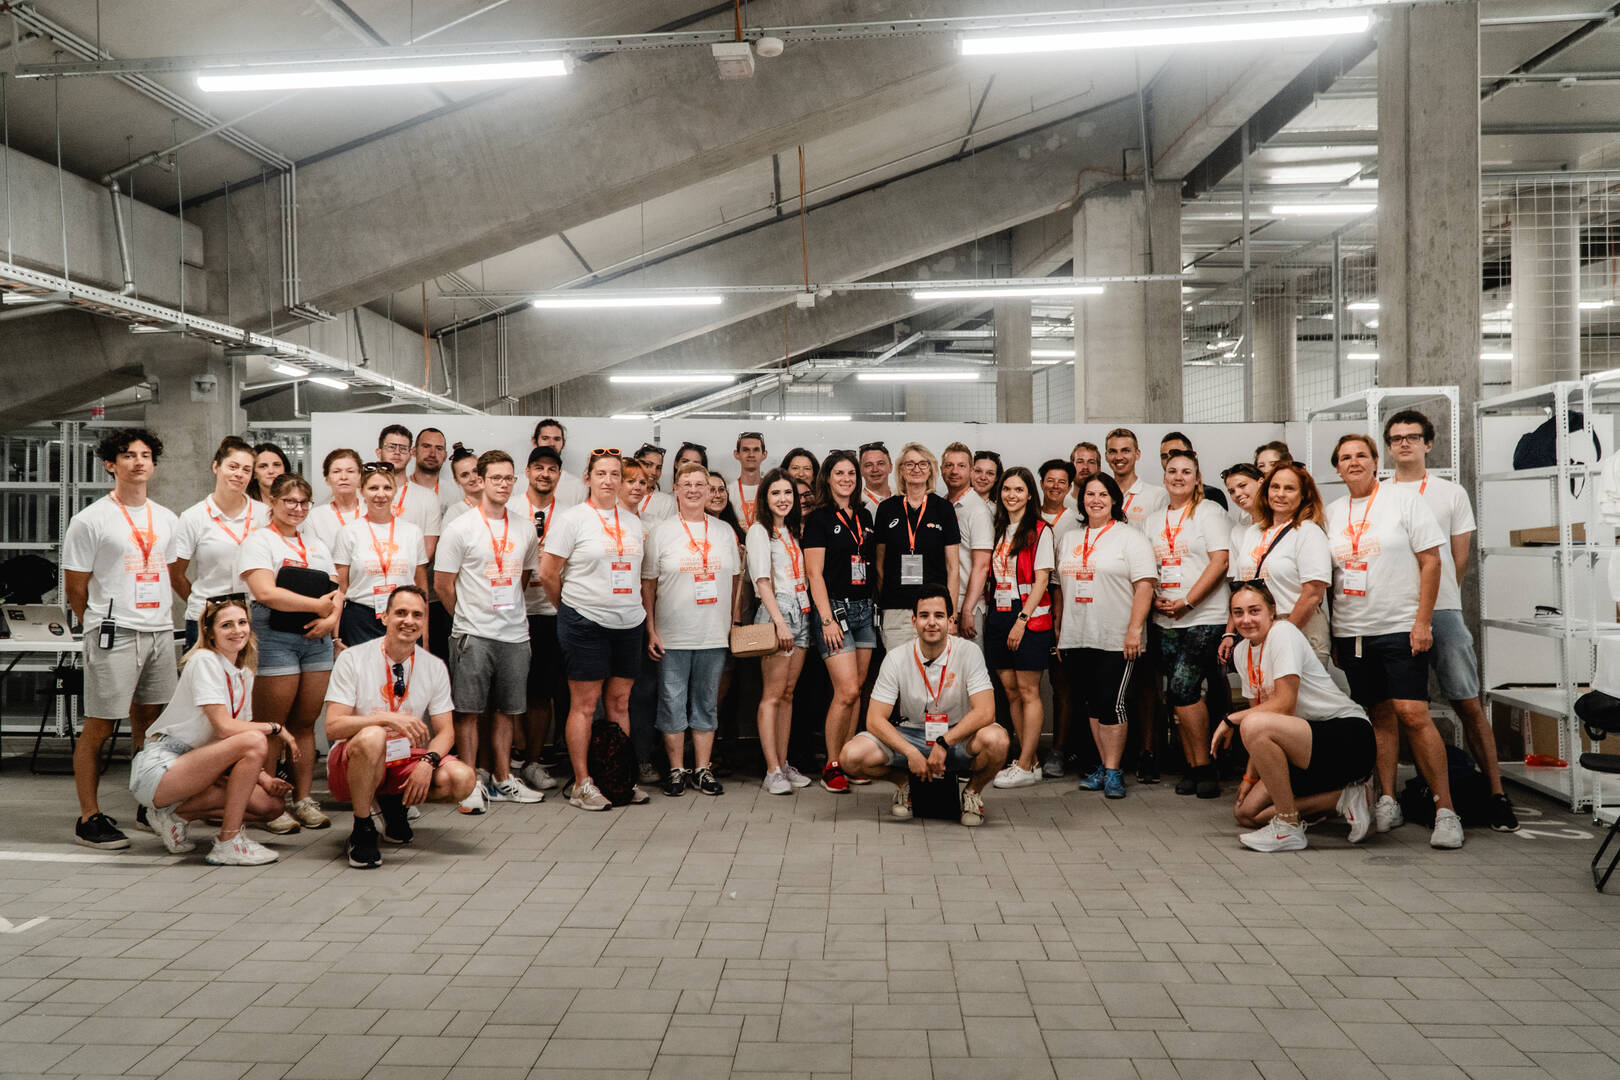 Budapest 2023 IAAF World Athletics Championships pilot event: HUSS volunteers pass the test with 5+